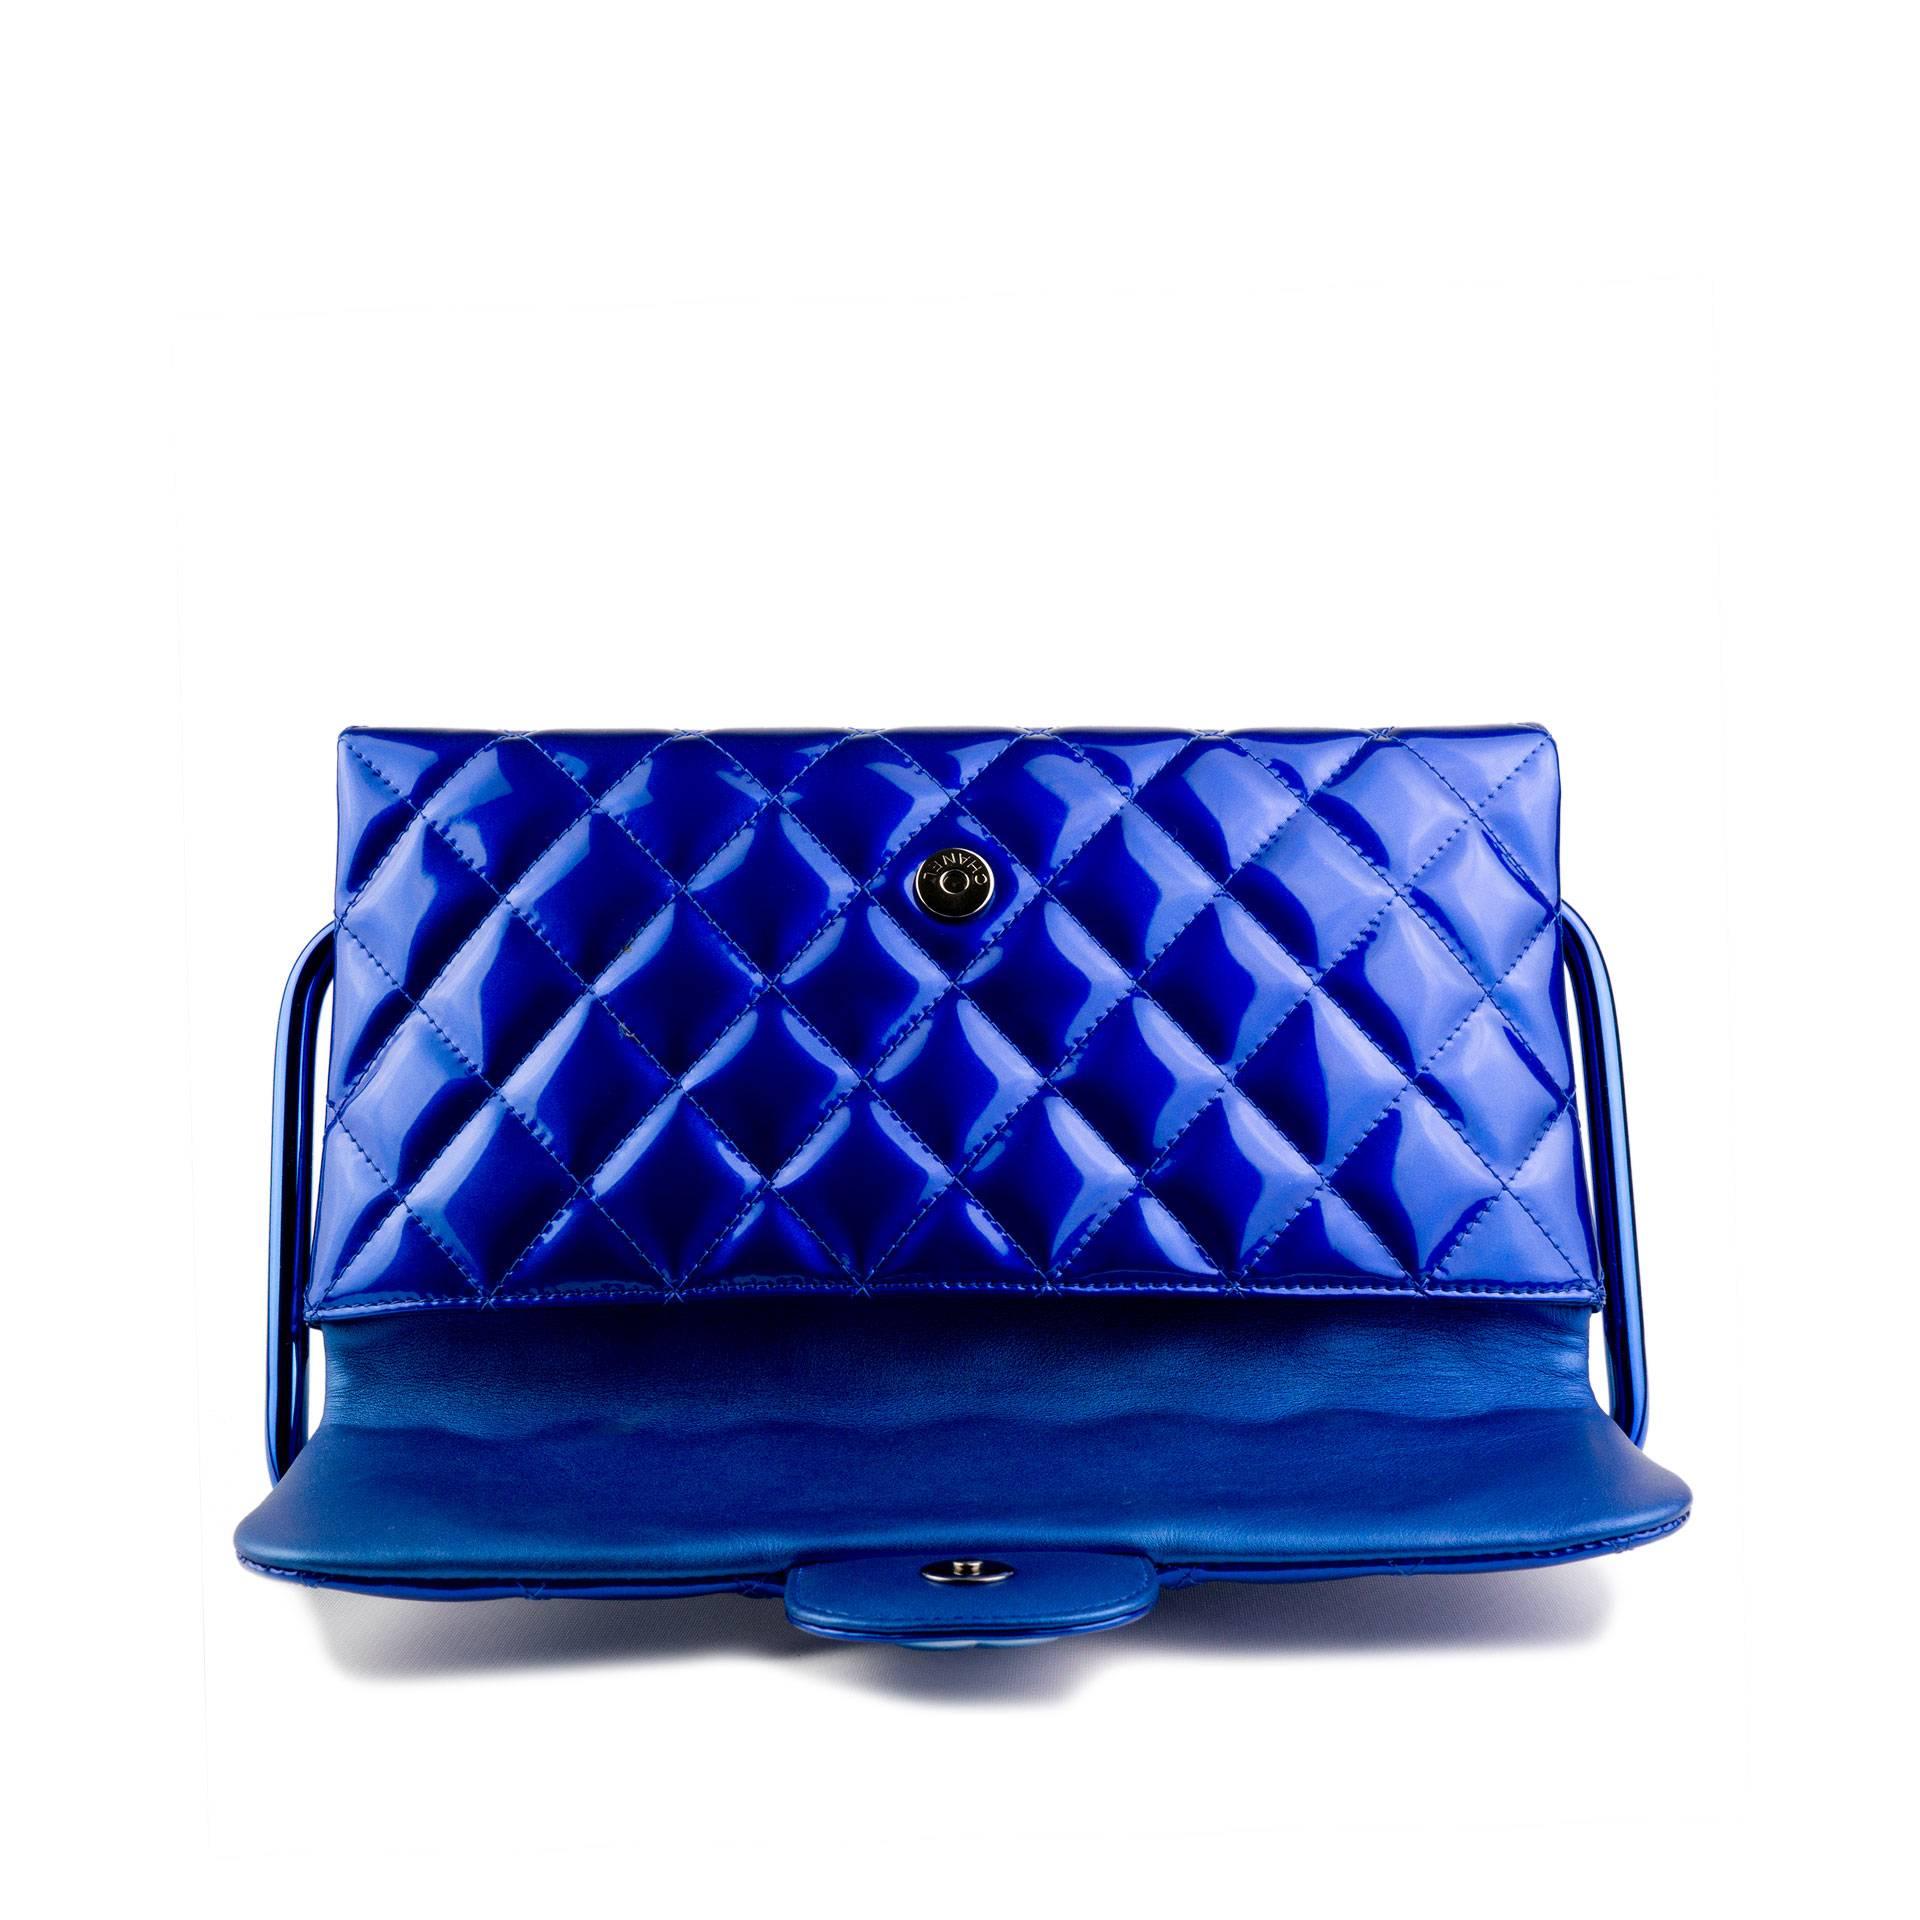 Chanel 2014 Electric Blue Patent Leather Quilted Retractable Frame Clutch Bag For Sale 3